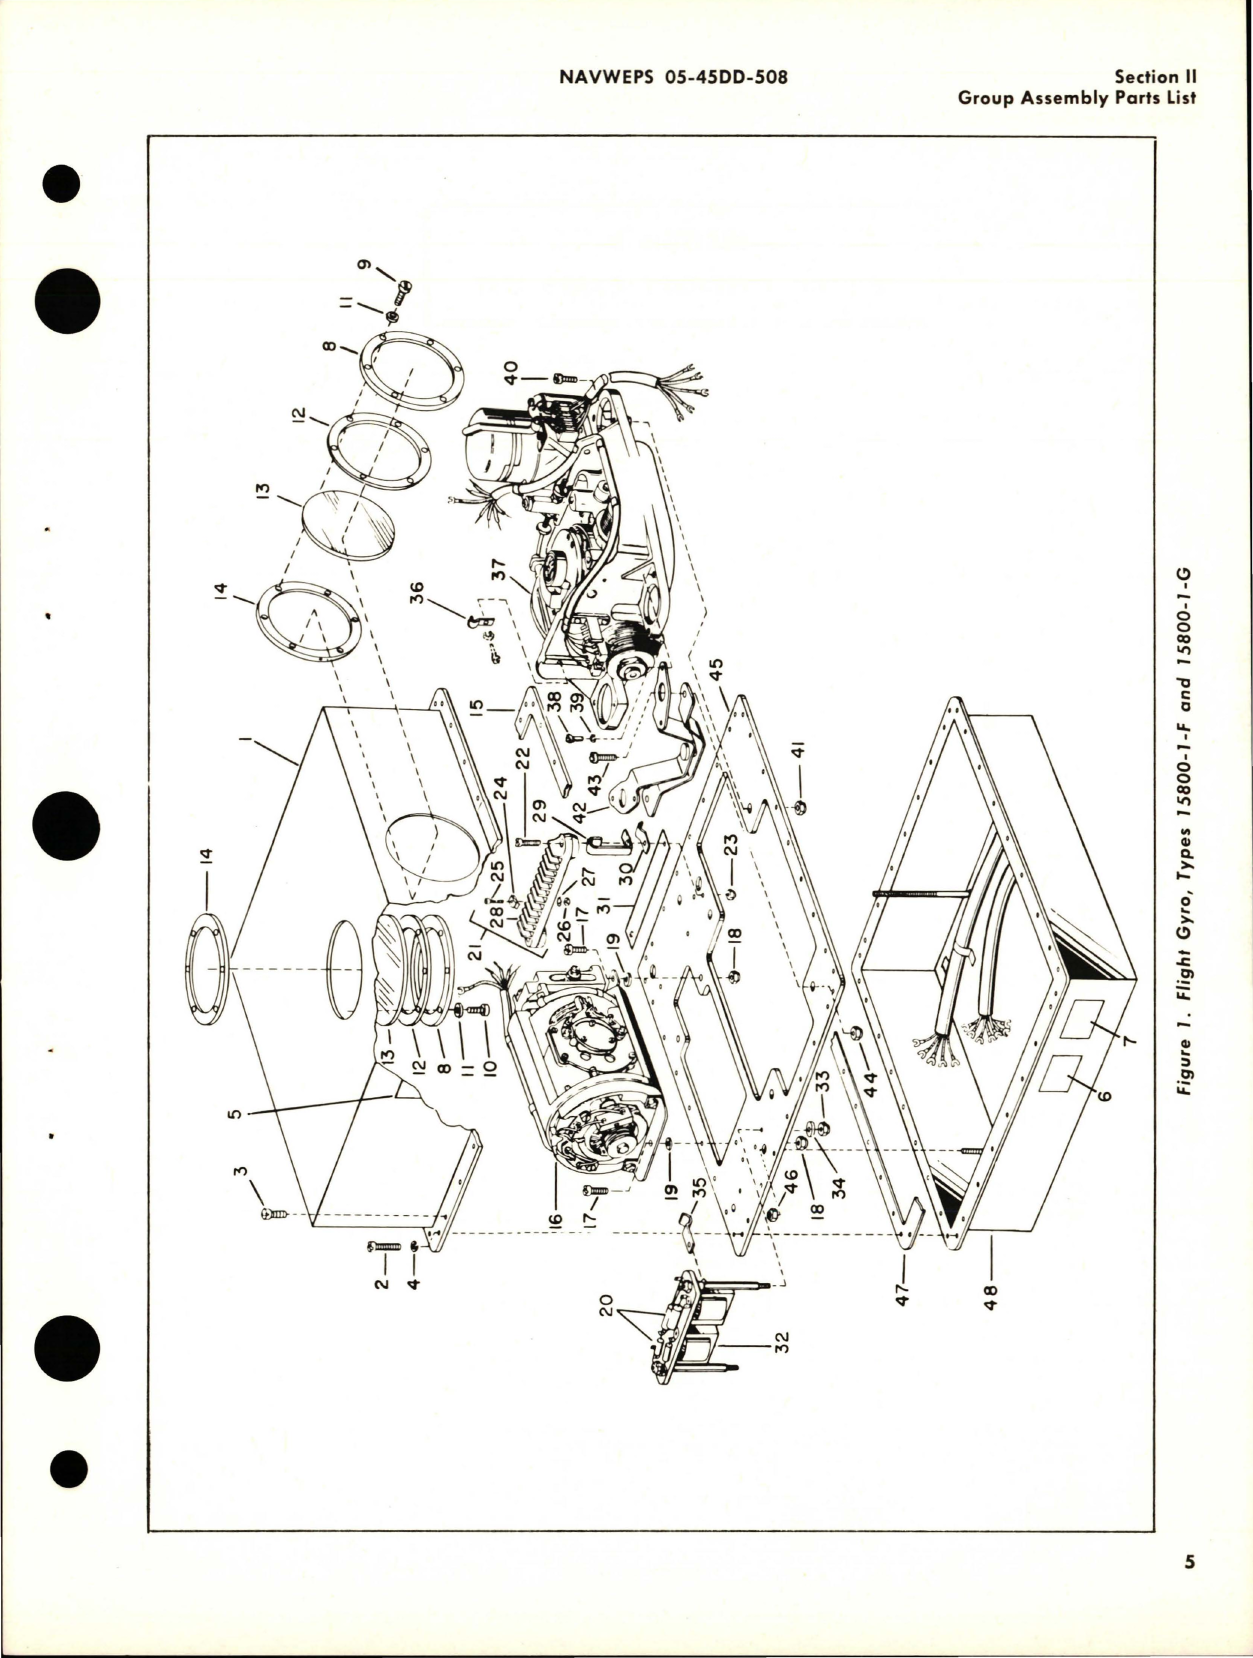 Sample page 9 from AirCorps Library document: Illustrated Parts Breakdown for Flight Gyro - Type 15800-1-F and 15800-1-G